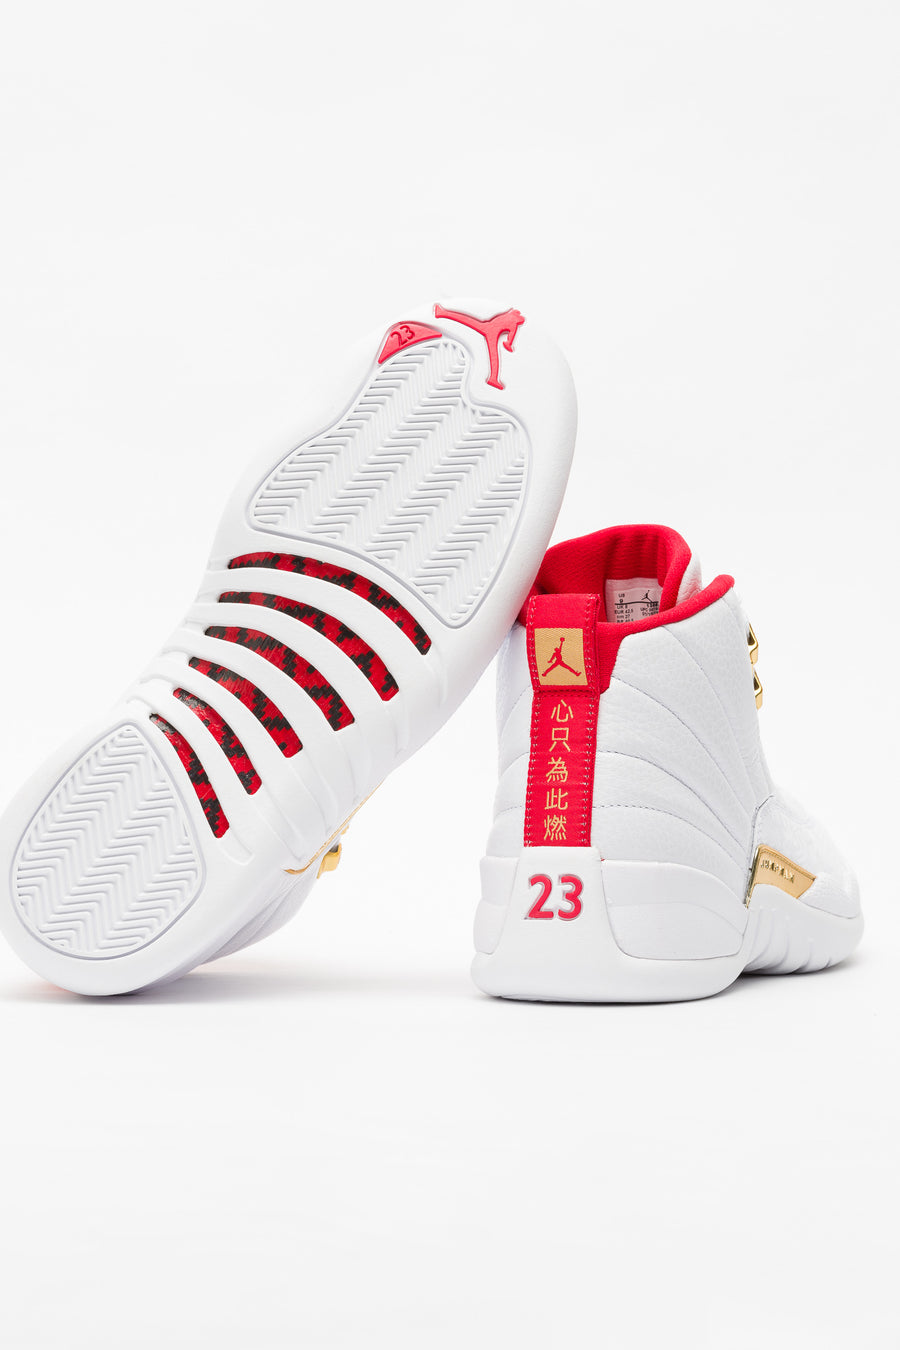 red and white jordan 12s